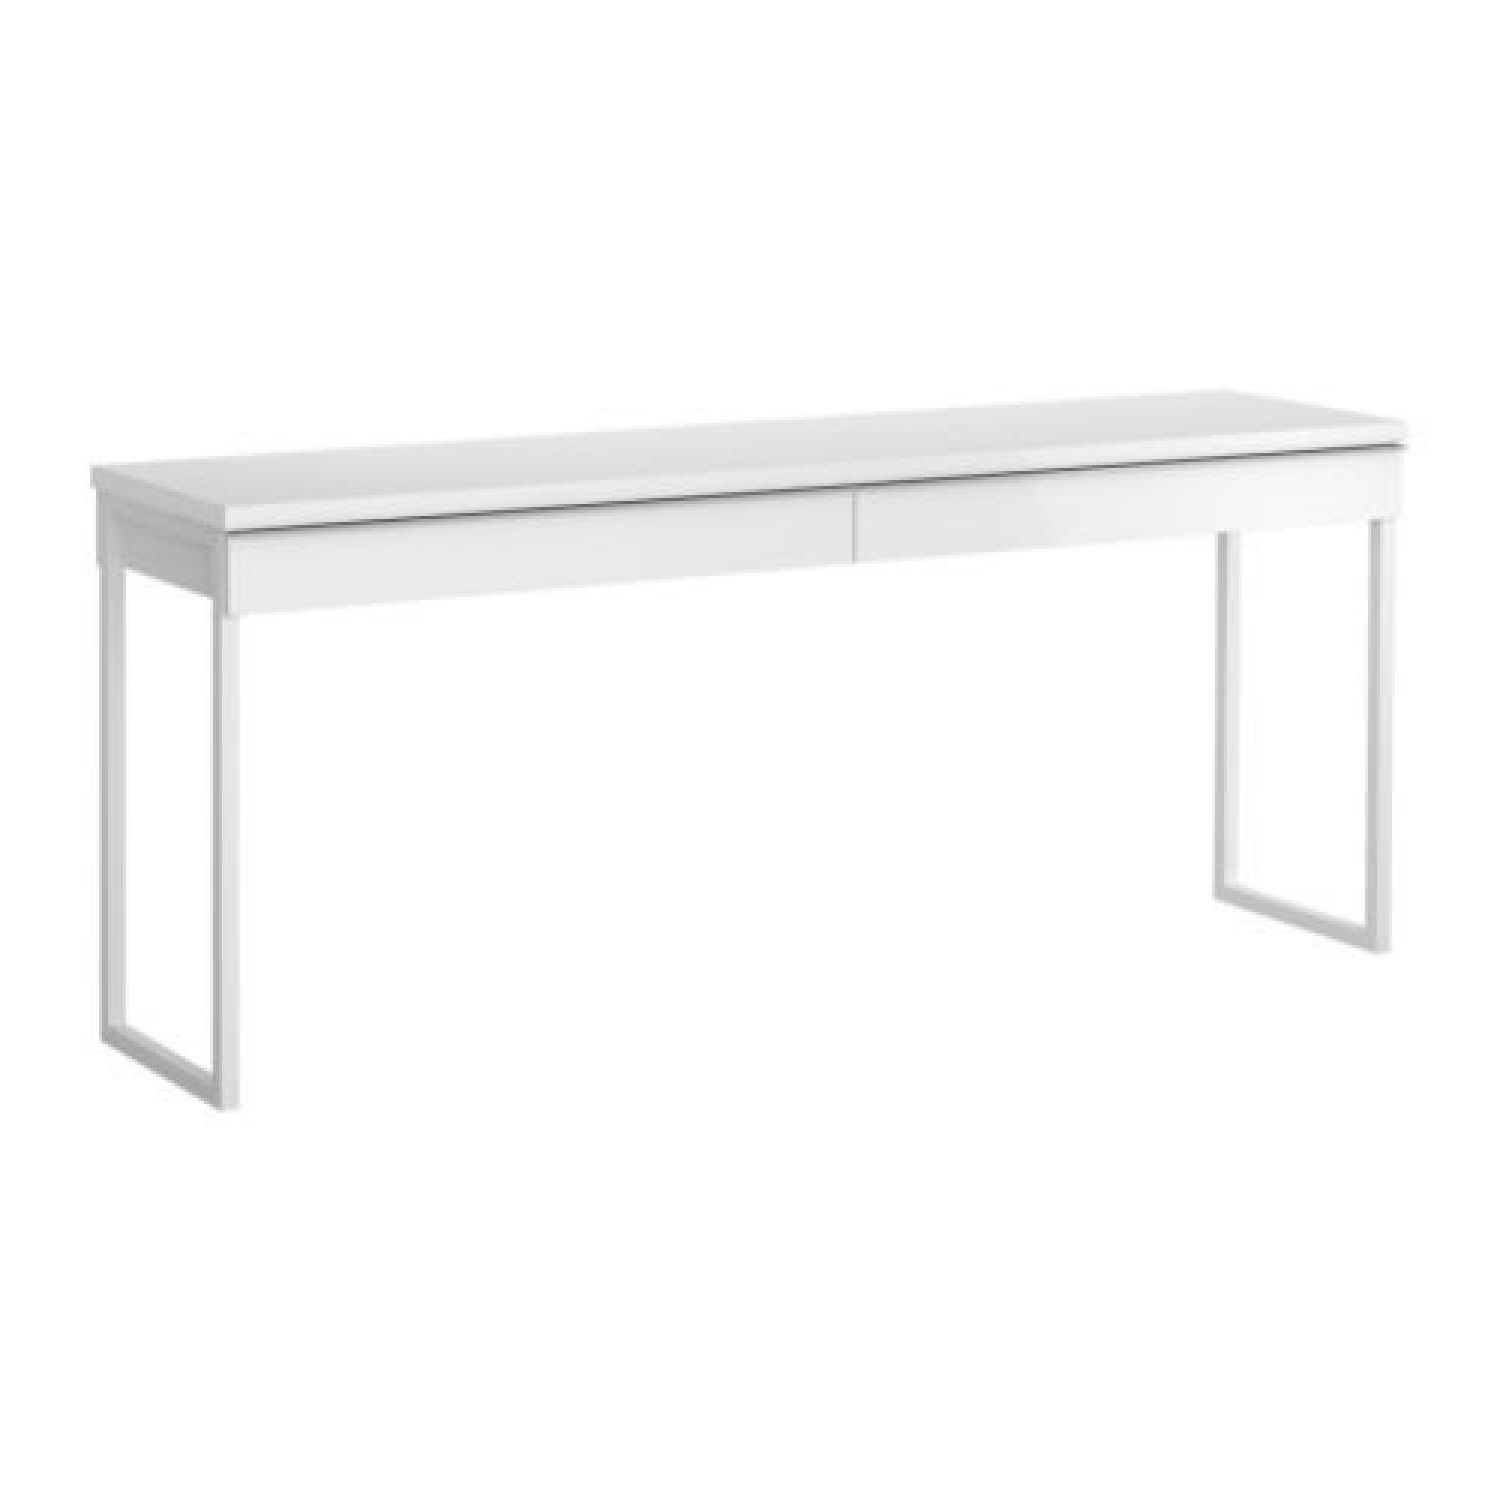 Gloss White Steel Console Tables Within Preferred White High Gloss Console Table – Ideas On Foter (View 1 of 10)